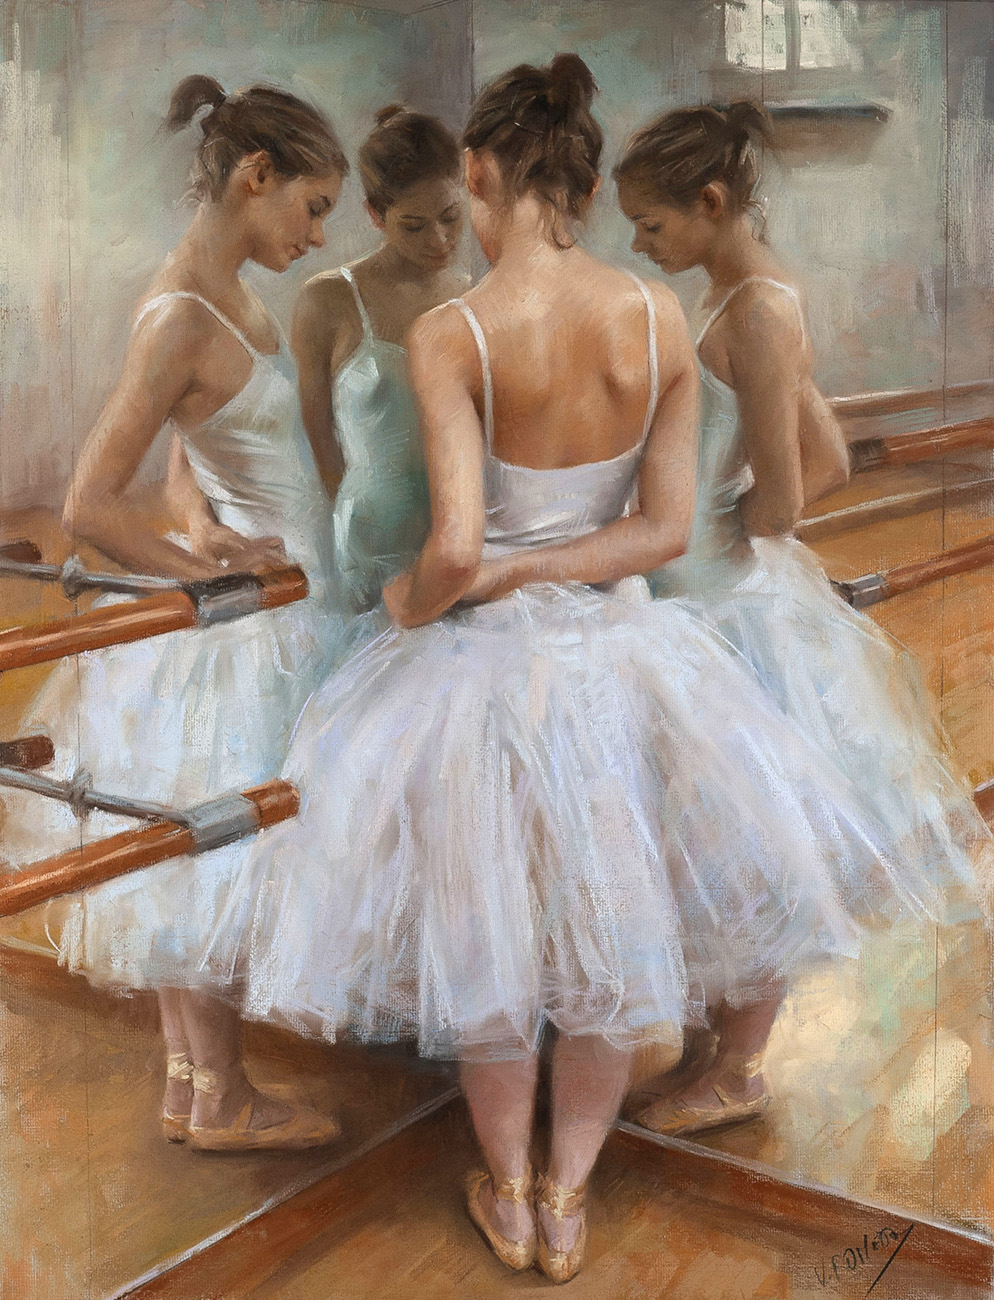 Reflections of a Dancer by Vincente Romero | Giclee on Canvas